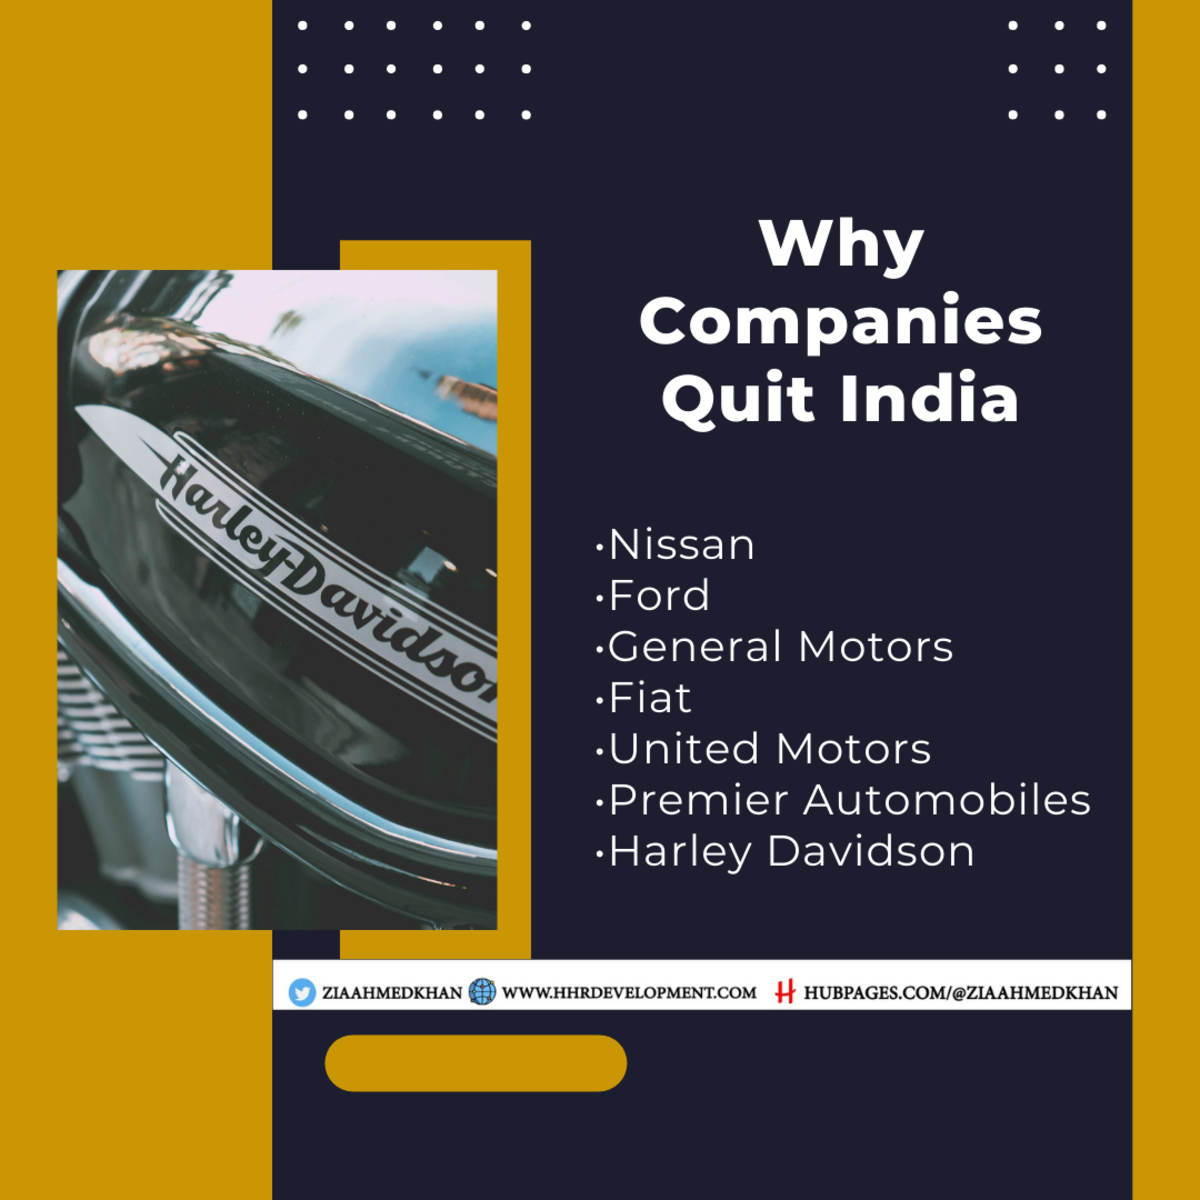 Why are Companies Leaving India